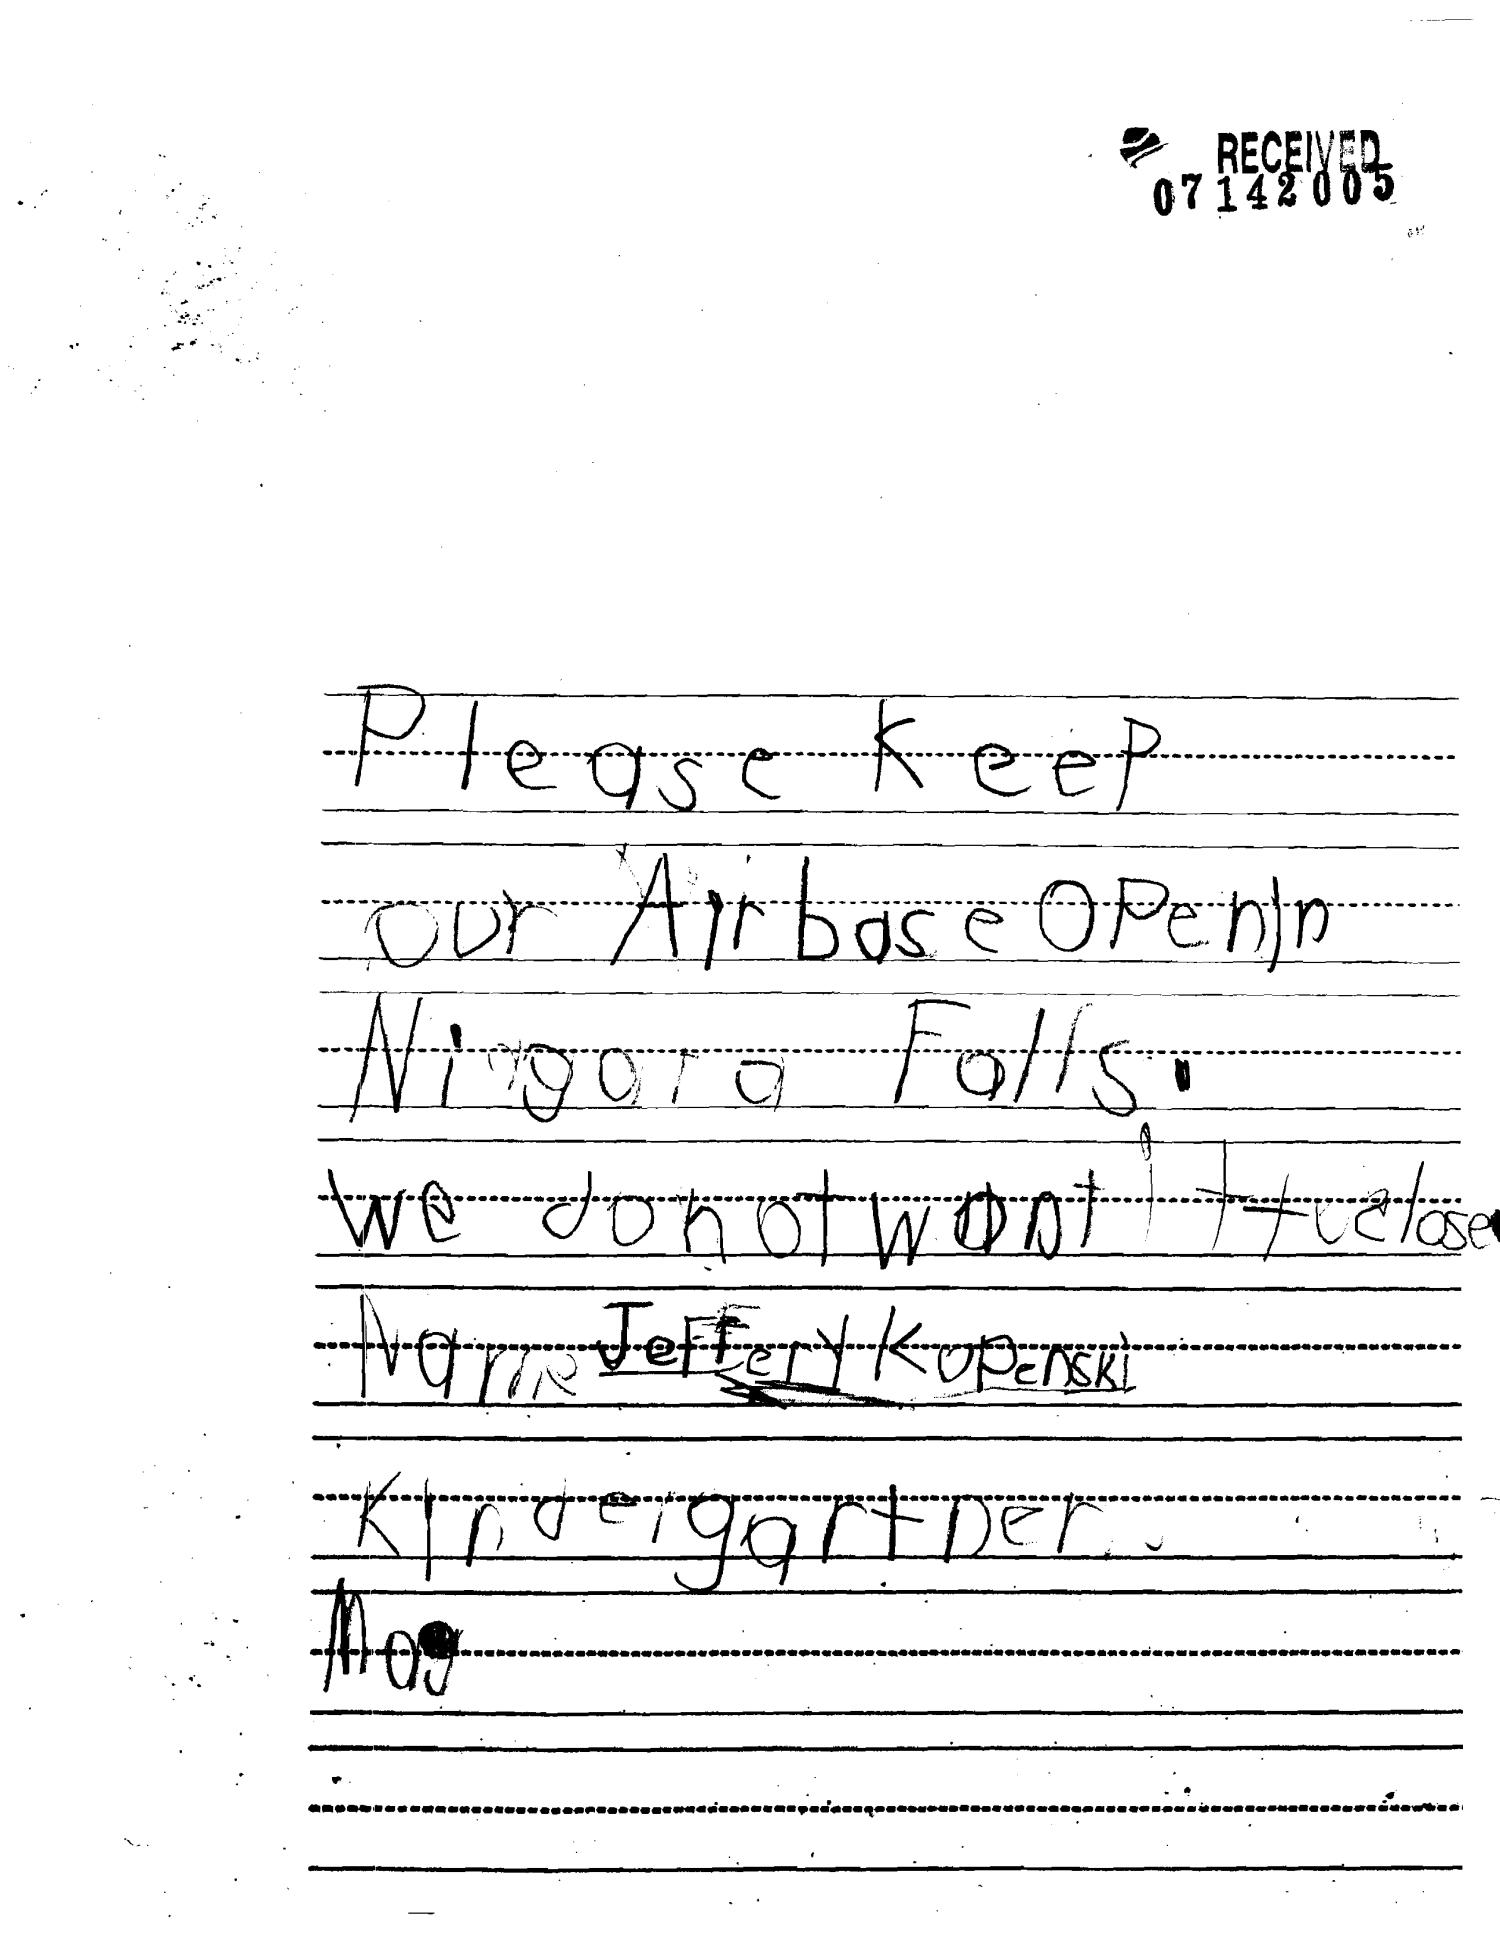 Letters From Children at Niagara Air Base Pleading for the Base to Stay Open
                                                
                                                    [Sequence #]: 12 of 85
                                                